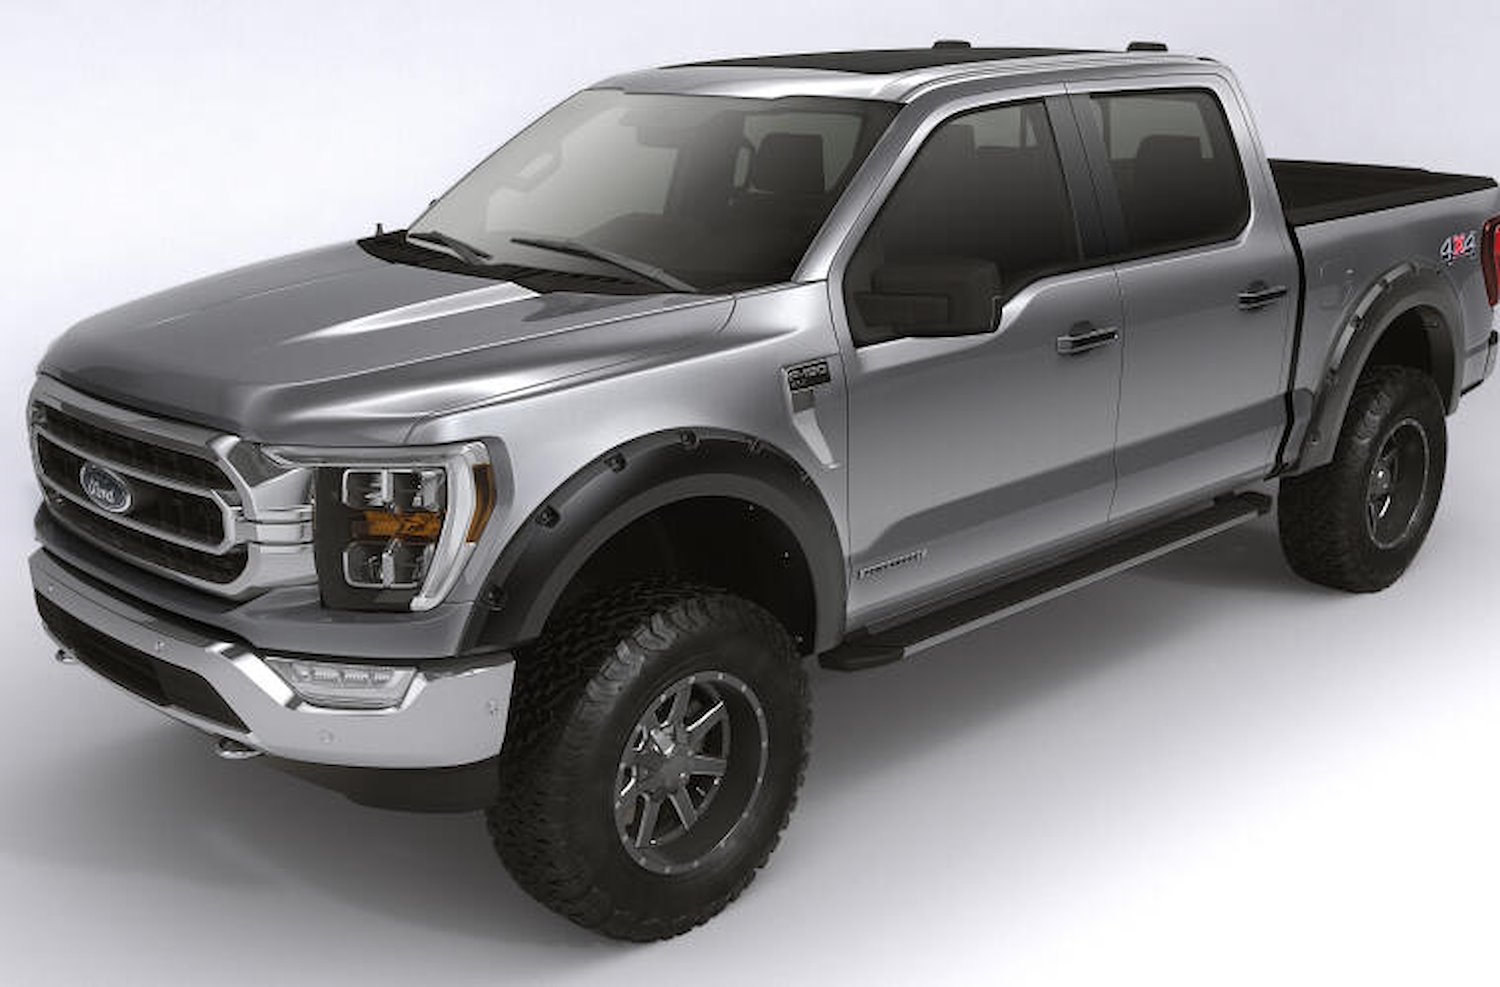 Forge Front/Rear Fender Flares for 2011-2016 Ford F-250, F-350 Super-Duty